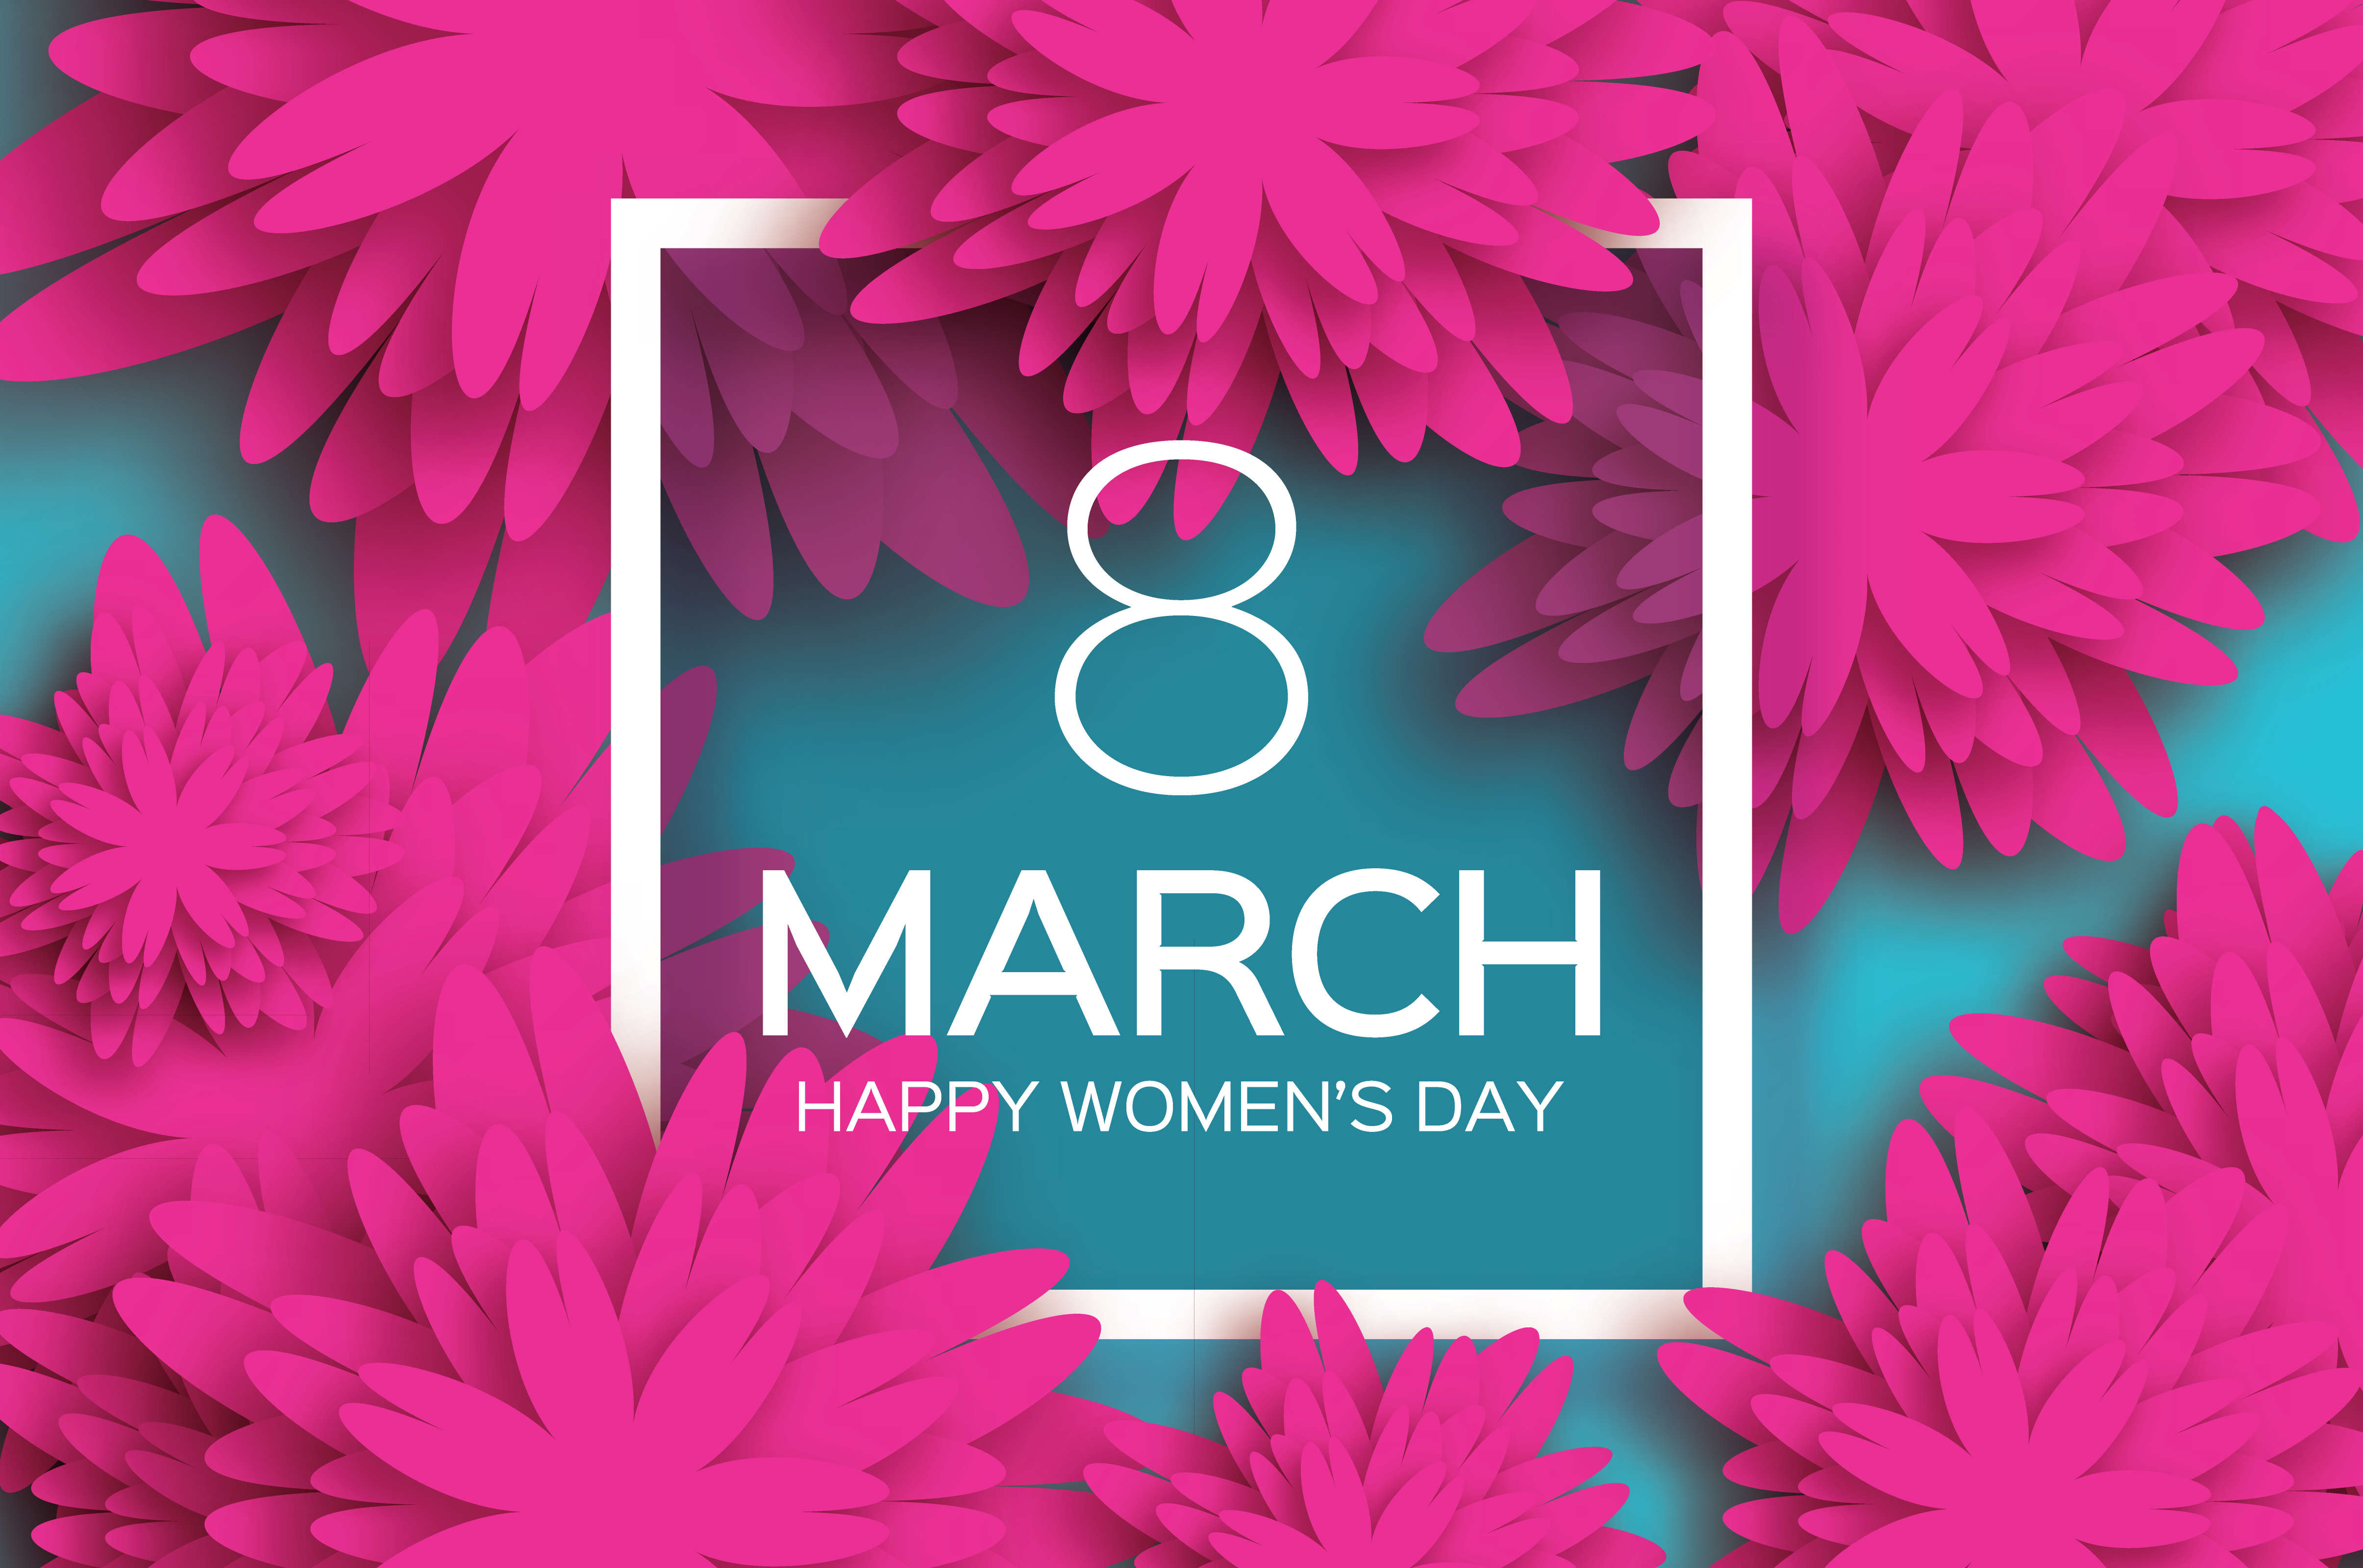 Happy Womens Day 2020 Images Messages Greetings Wishes